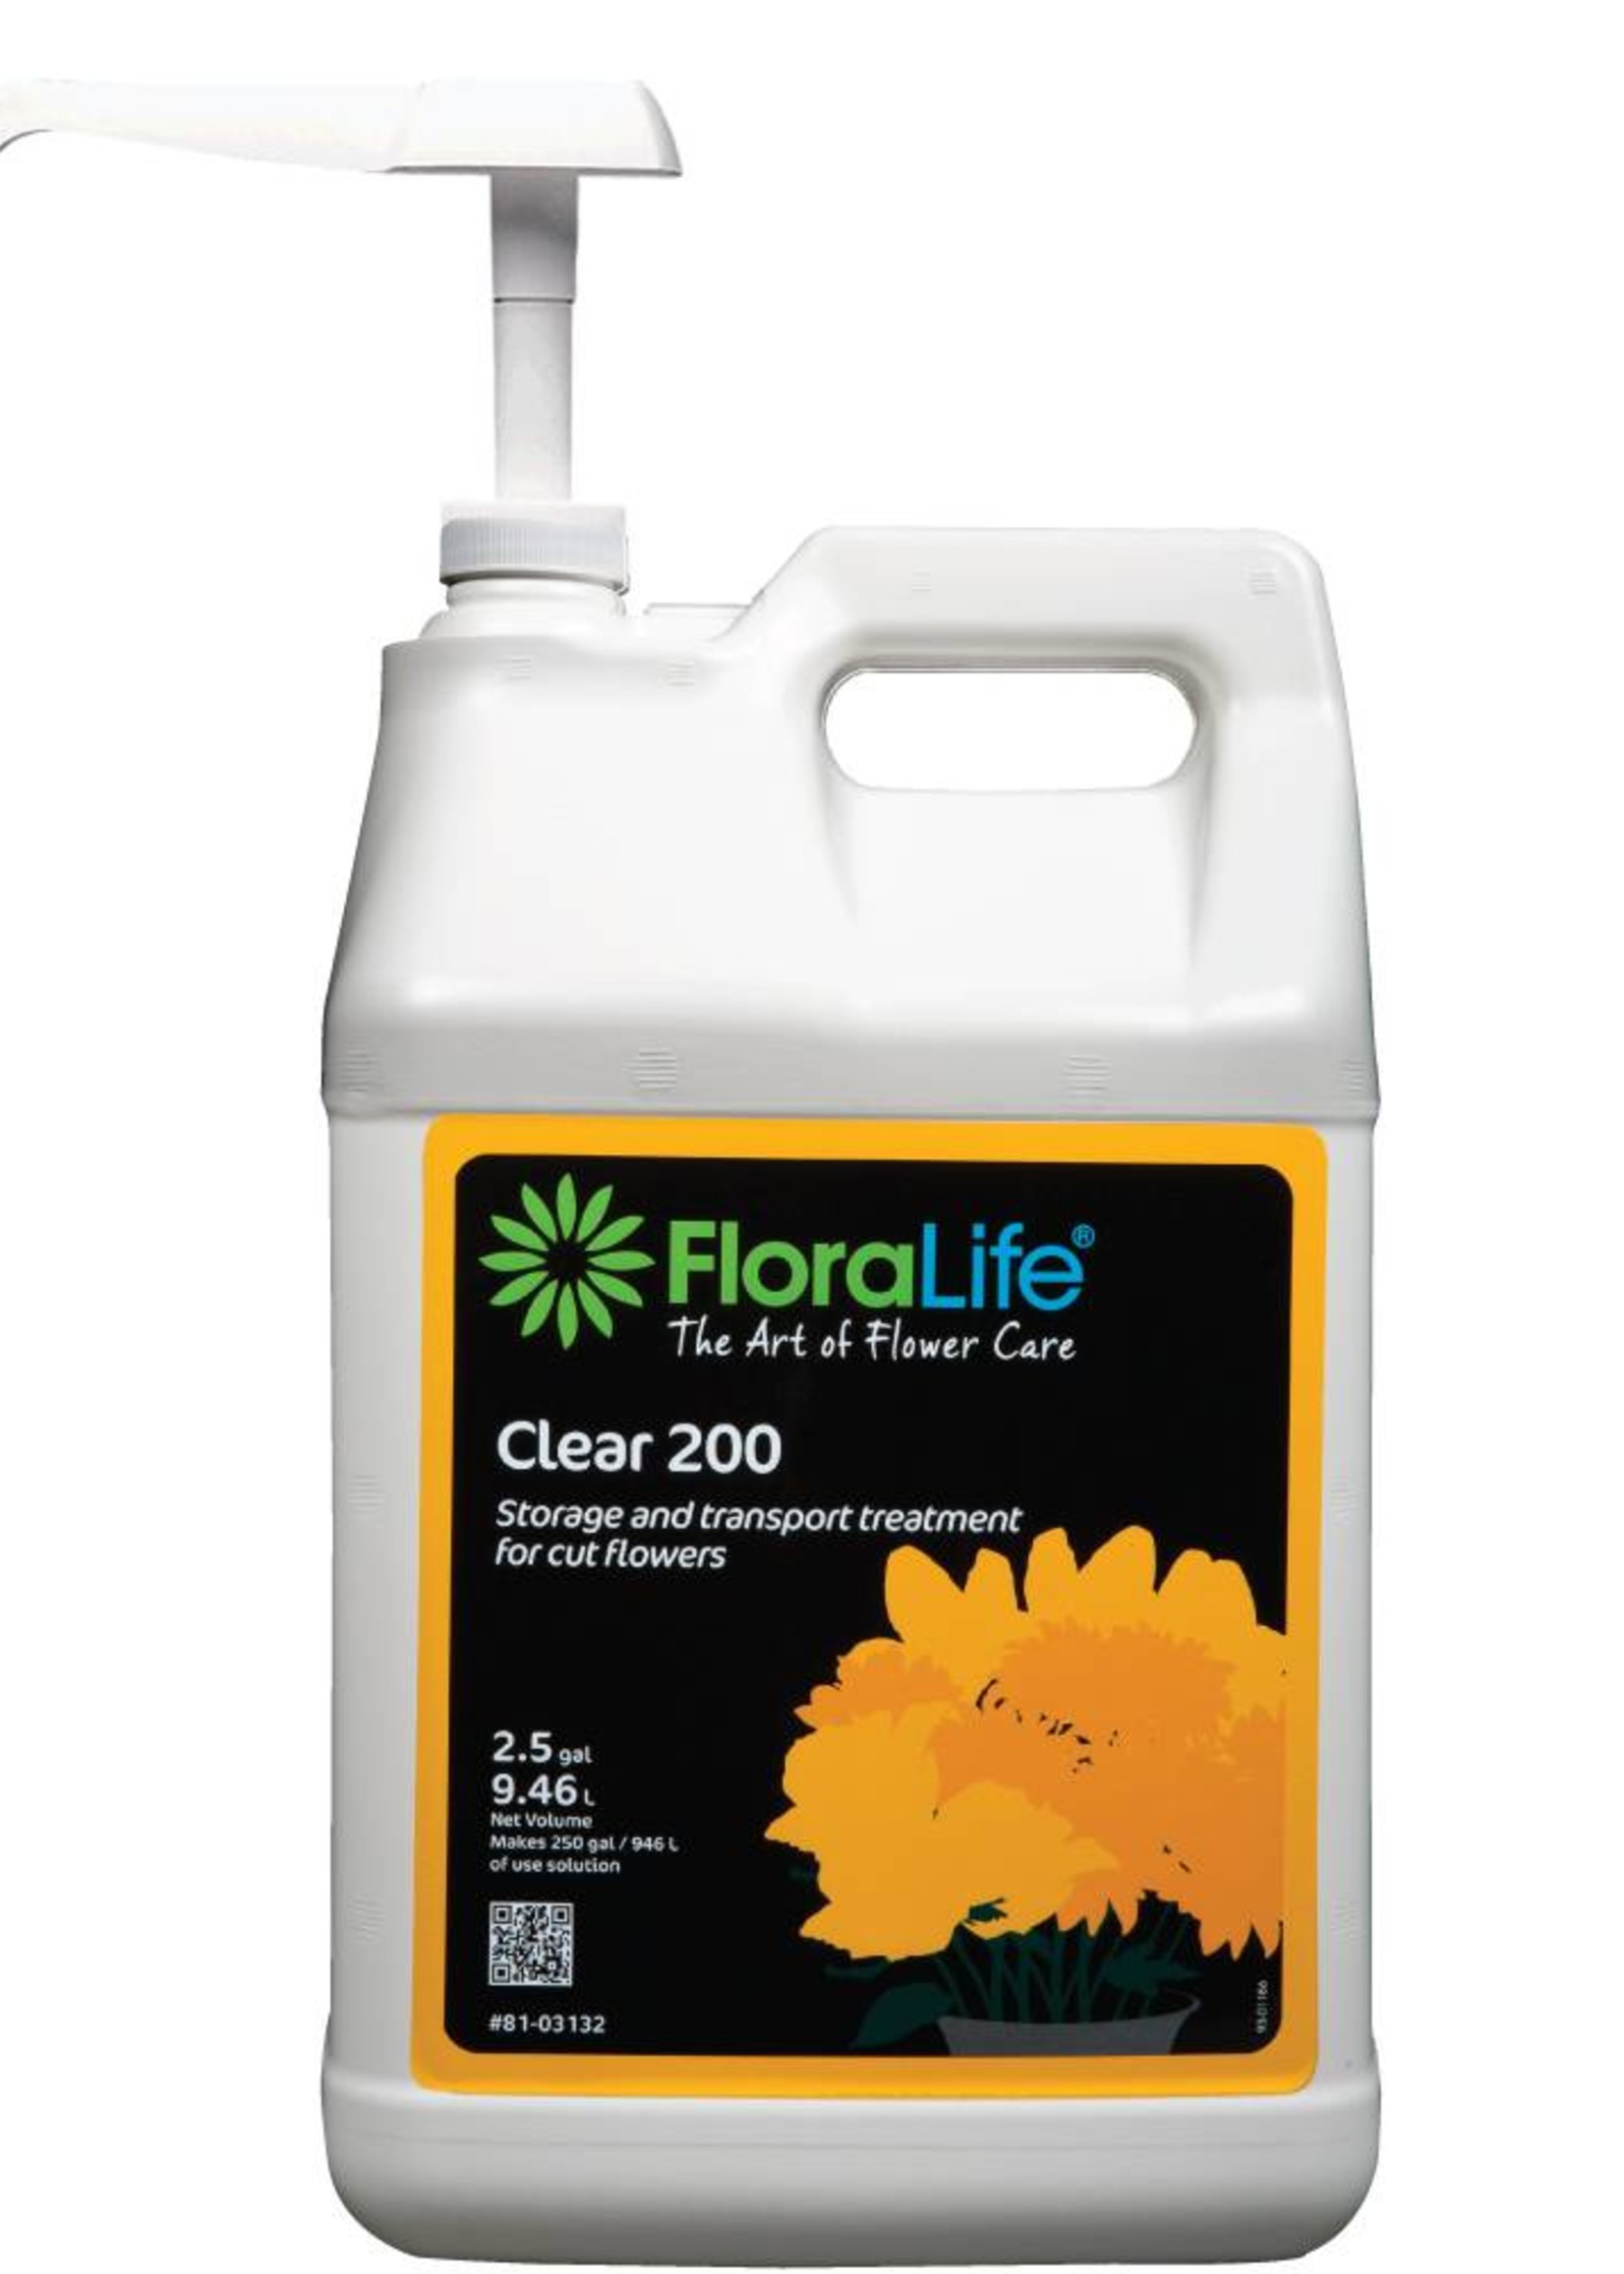 Floralife® Clear 200 storage and transport